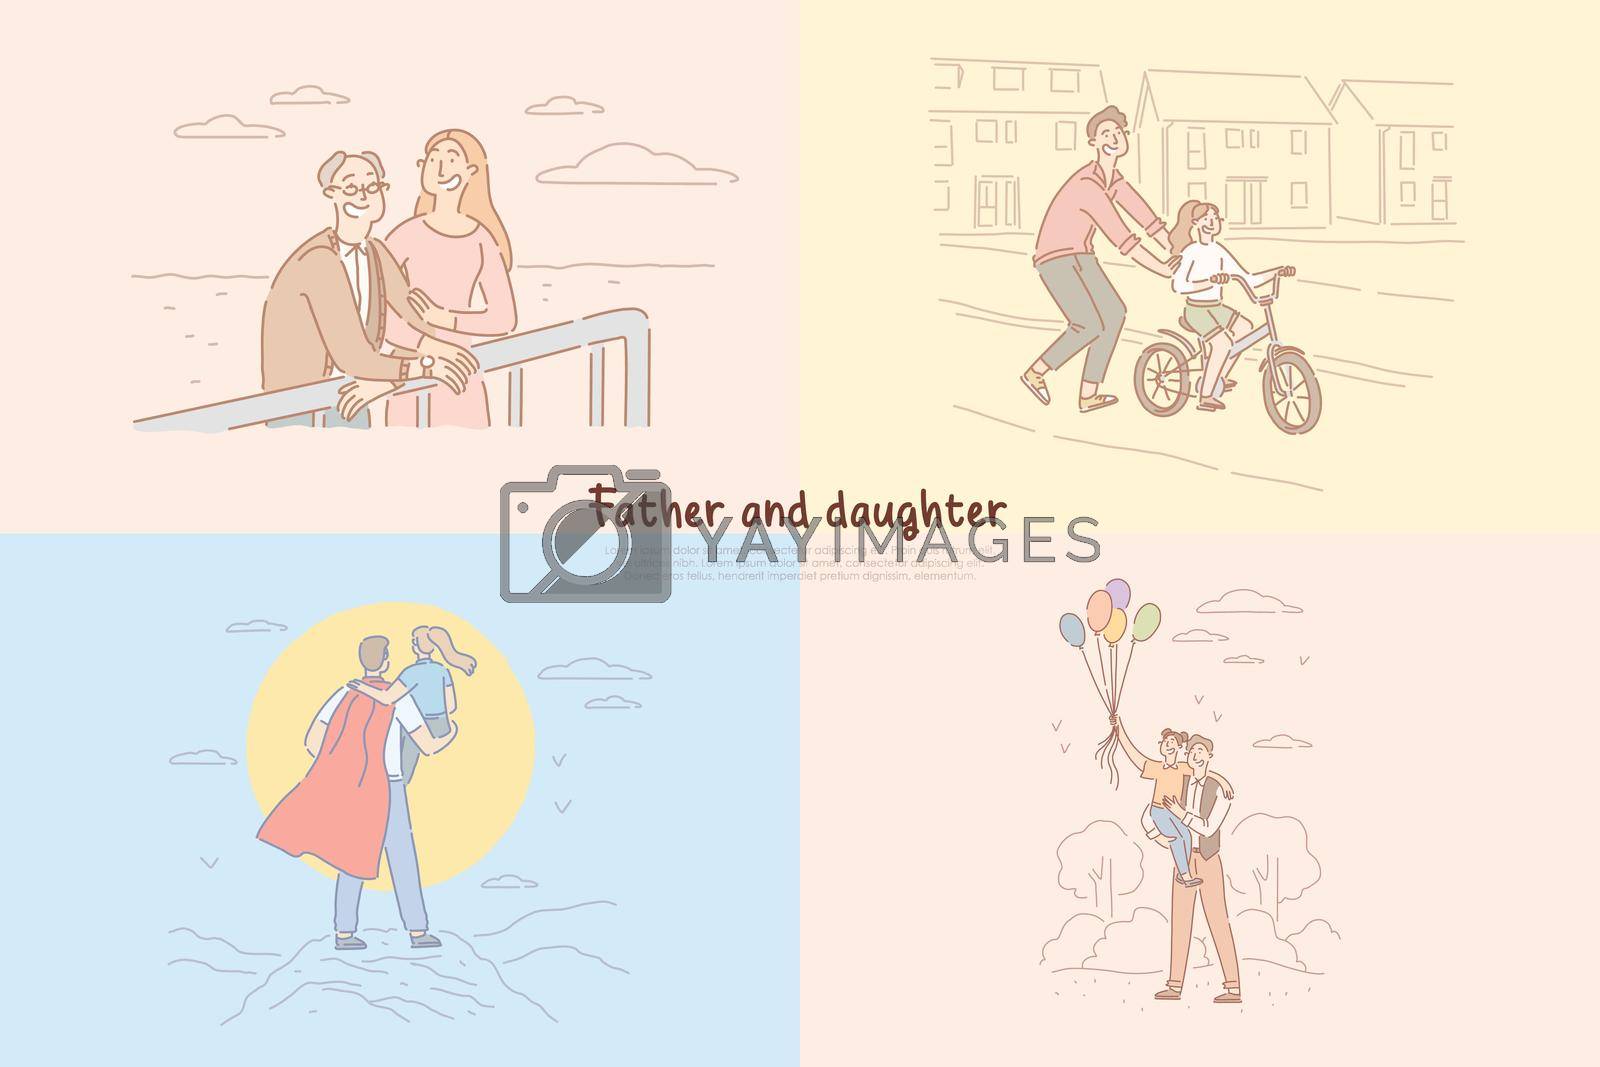 Father and daughter relationship, parent teaching kid riding bicycle, childhood happy moments banner template. Fatherhood, parenthood, family time concept cartoon sketch. Flat vector illustration